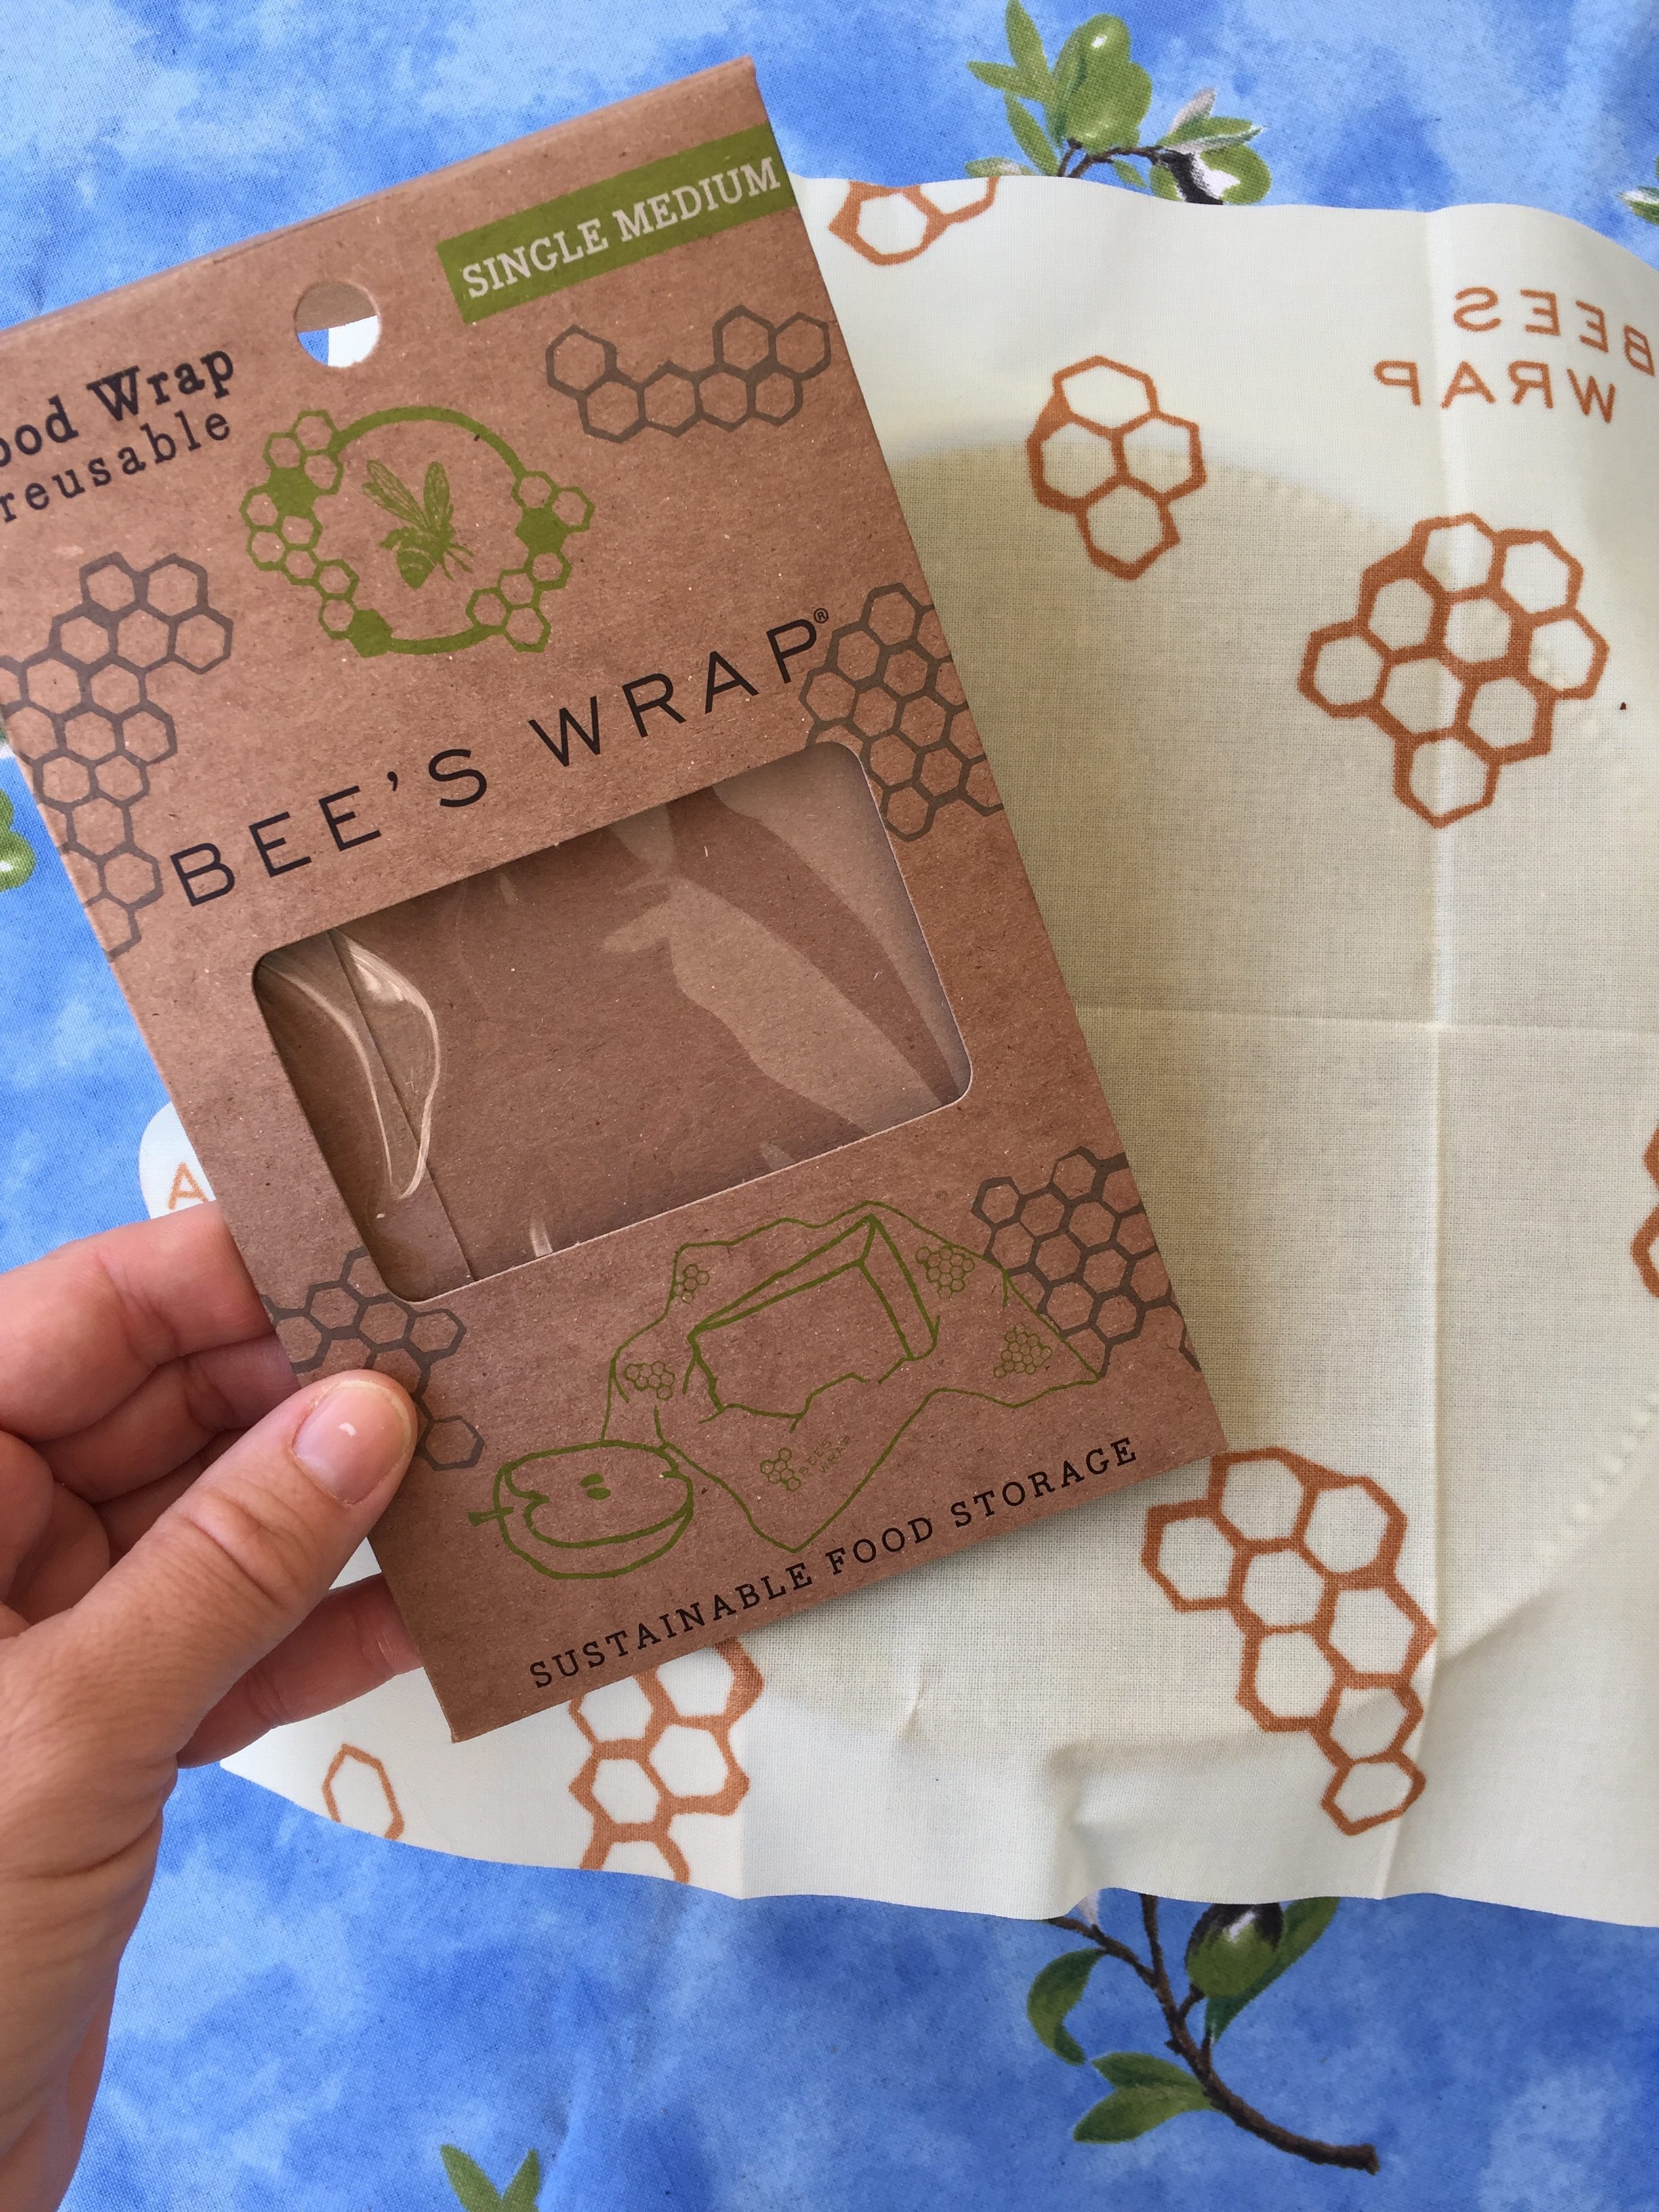 Reusable food wrap, trying to lessen our consumption of plastic.